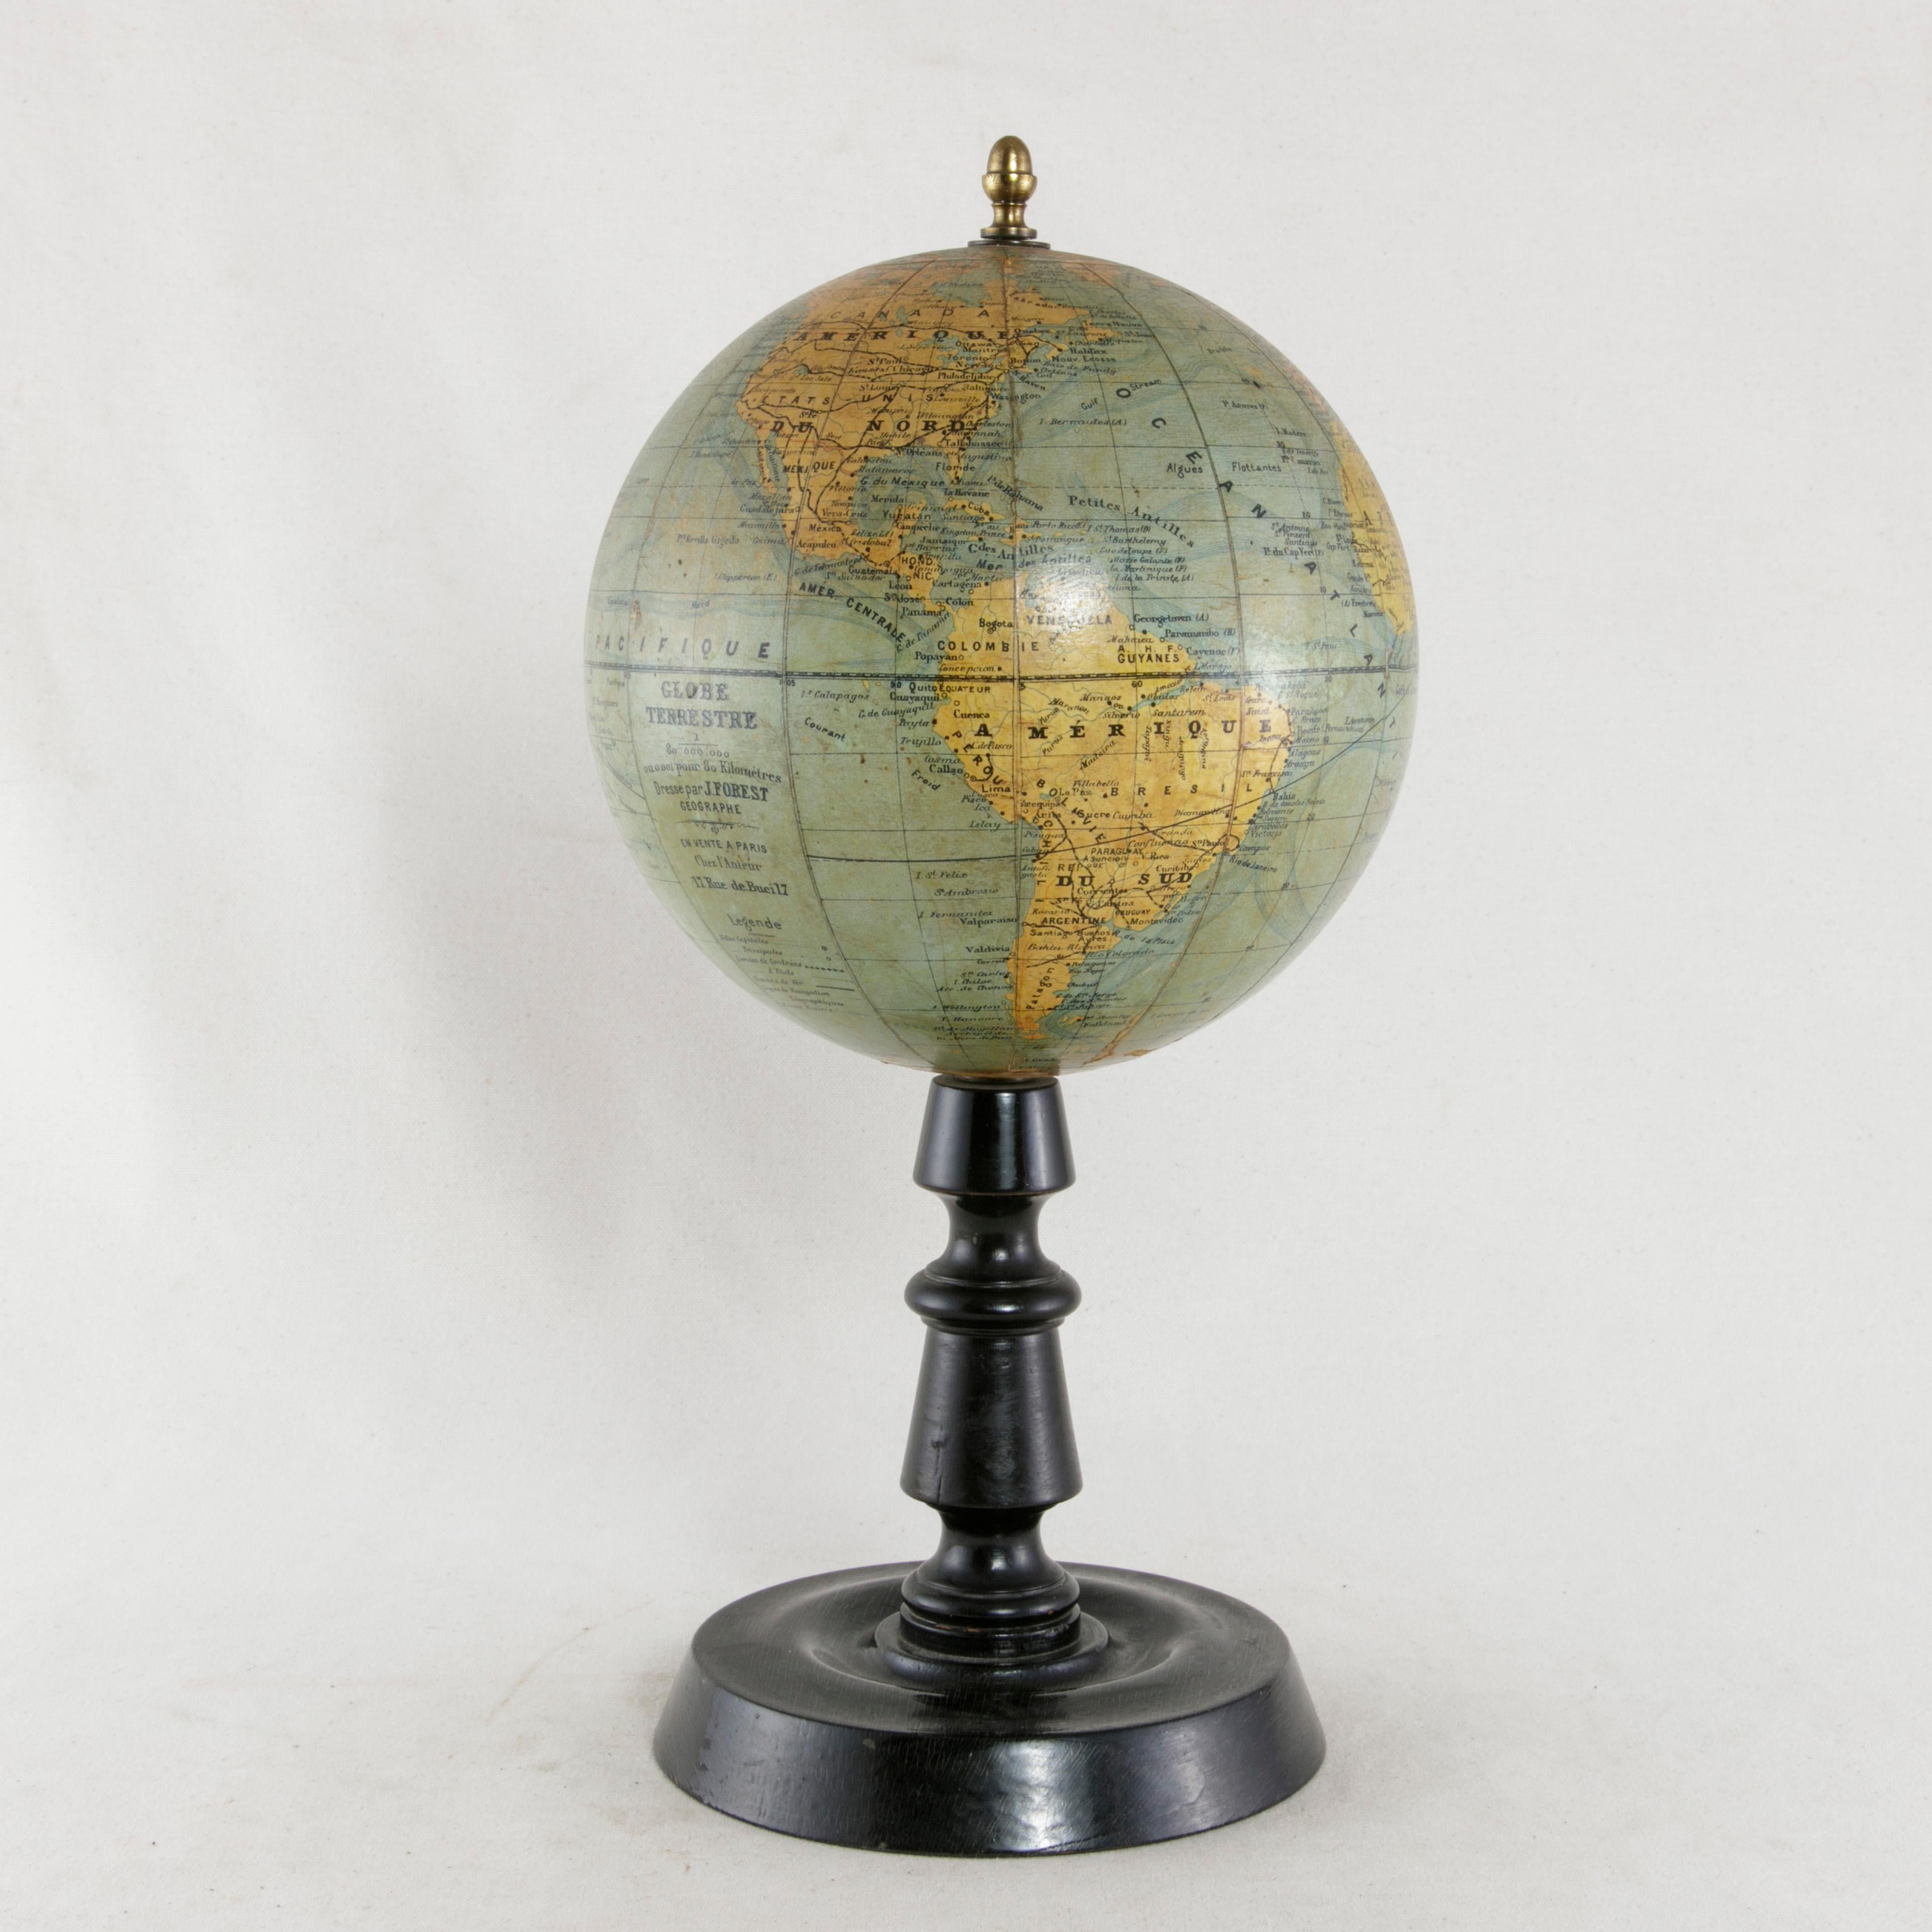 This papier mâché terrestrial globe from the early 20th century was edited by the renowned French cartographer J. Forest and features not only physical borders, but also ocean currents and train line routes of the period. A piece of world history,